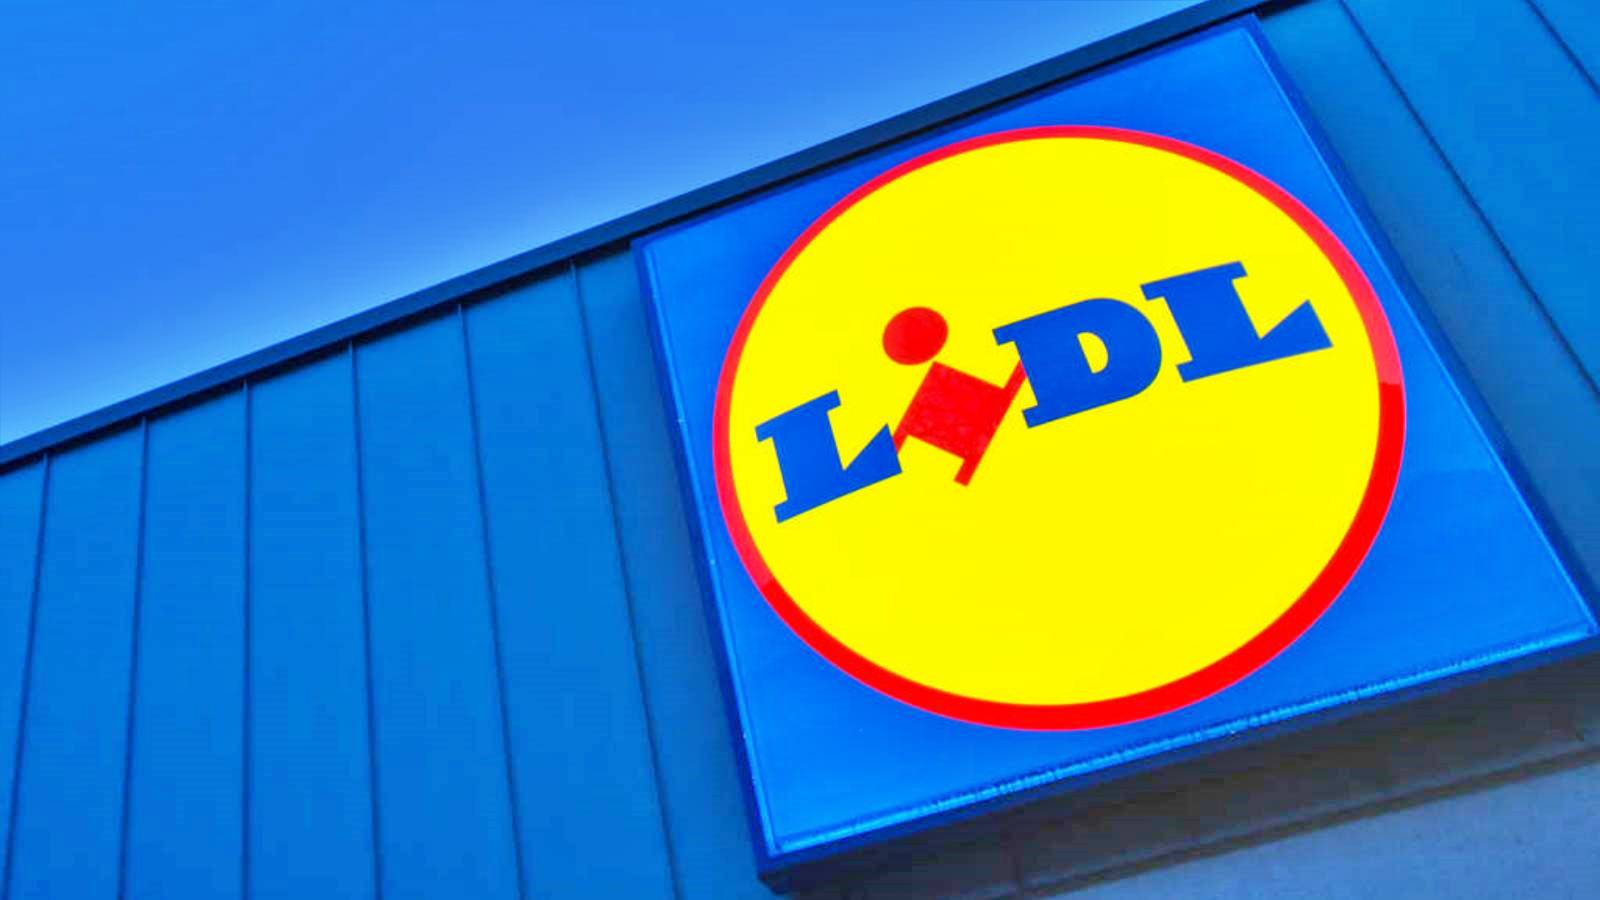 LIDL Romania's announcements target customers of all stores in the country